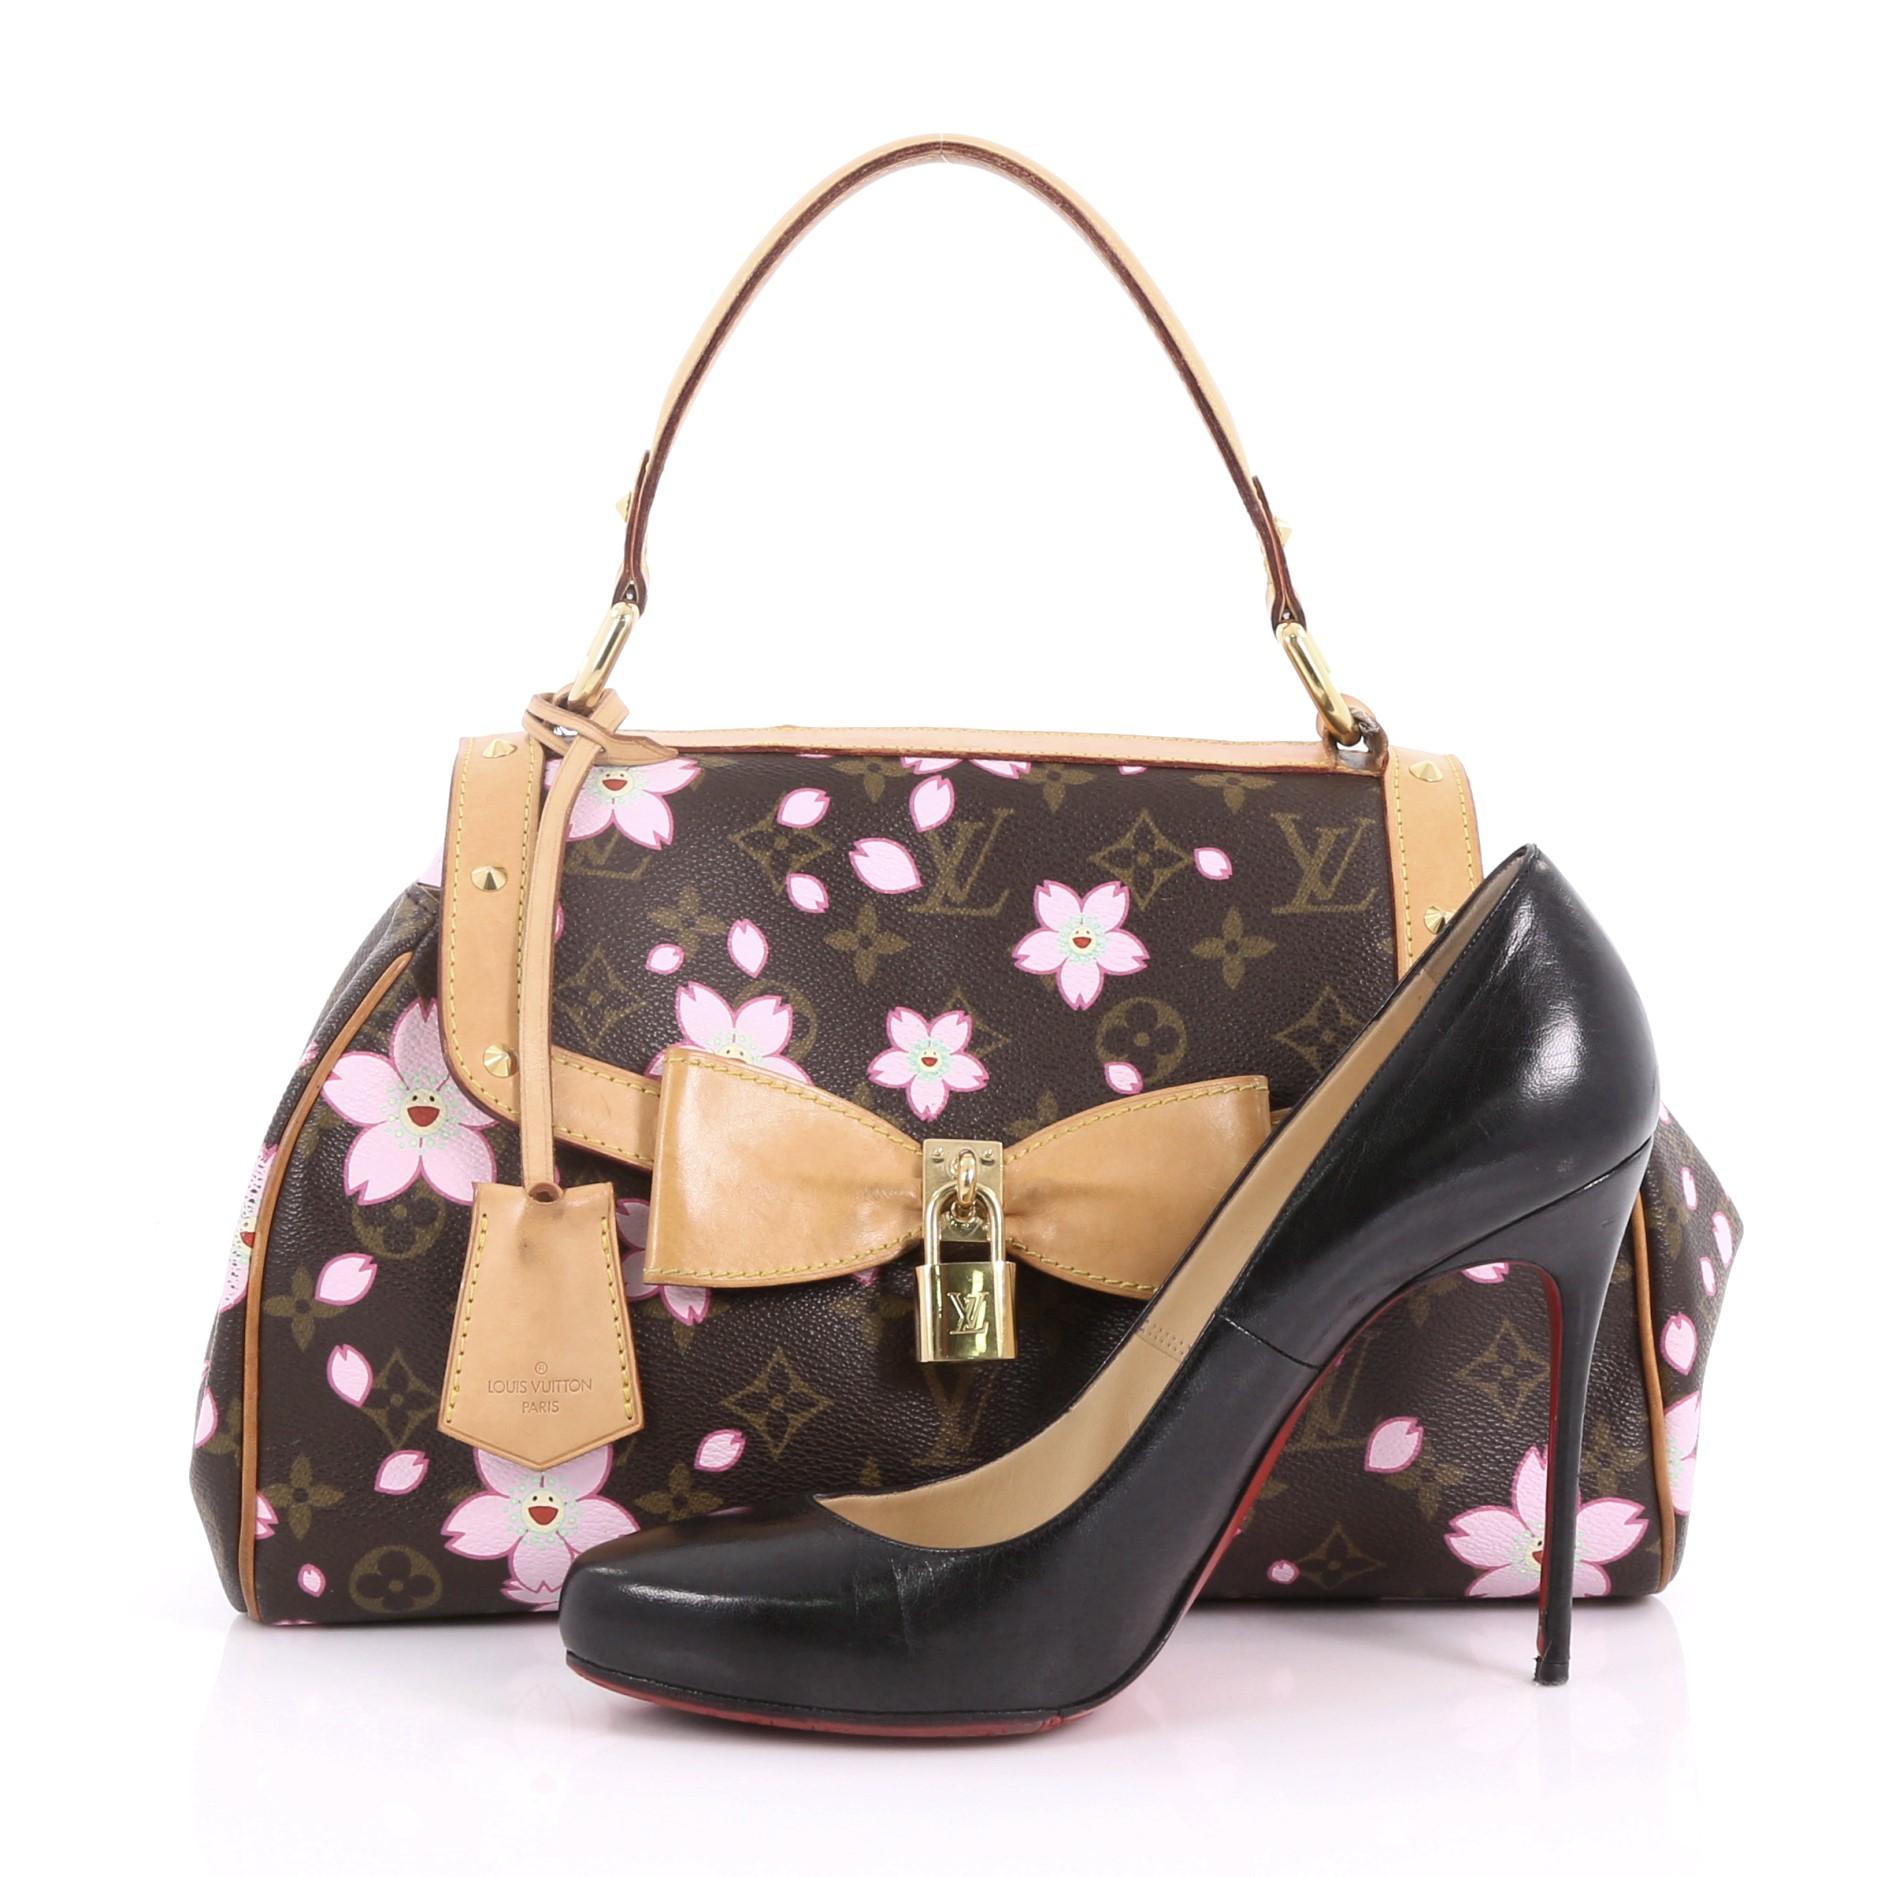 This Louis Vuitton Retro Bag Limited Edition Cherry Blossom, crafted from brown monogram coated canvas with cherry blossom prints by Takashi Murakami, features a single looped vachetta leather handle, frontal flap with oversized bow, and gold-tone